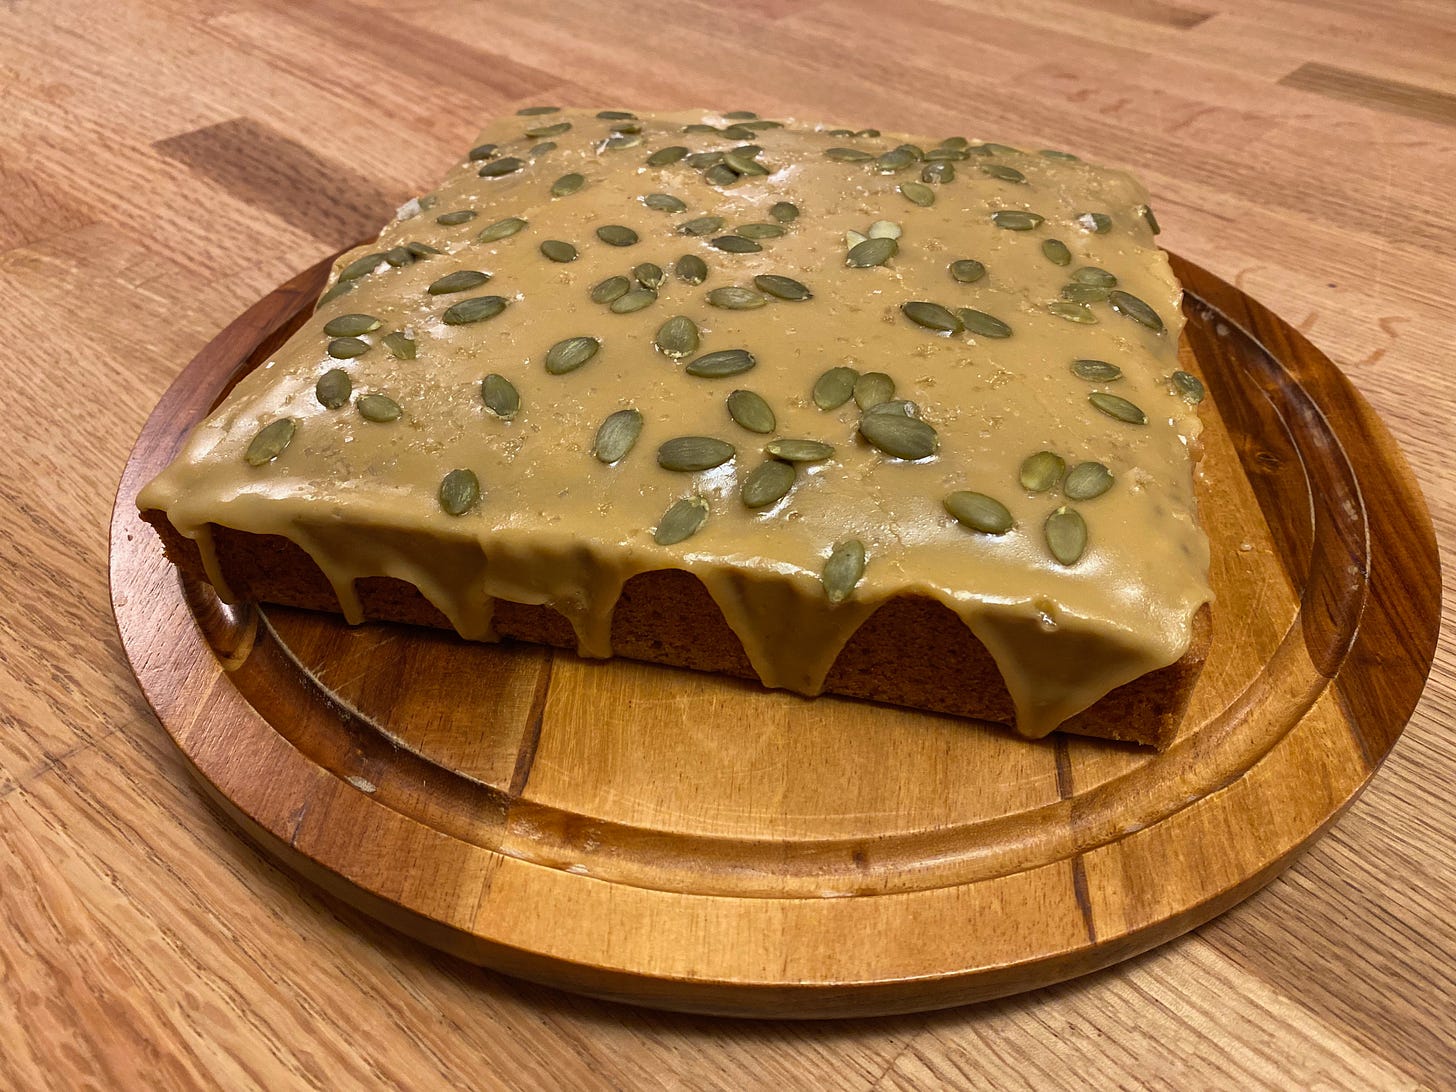 A square cake glazed with a shiny caramel-colored frosting and scattered with pepitas and flaky salt.